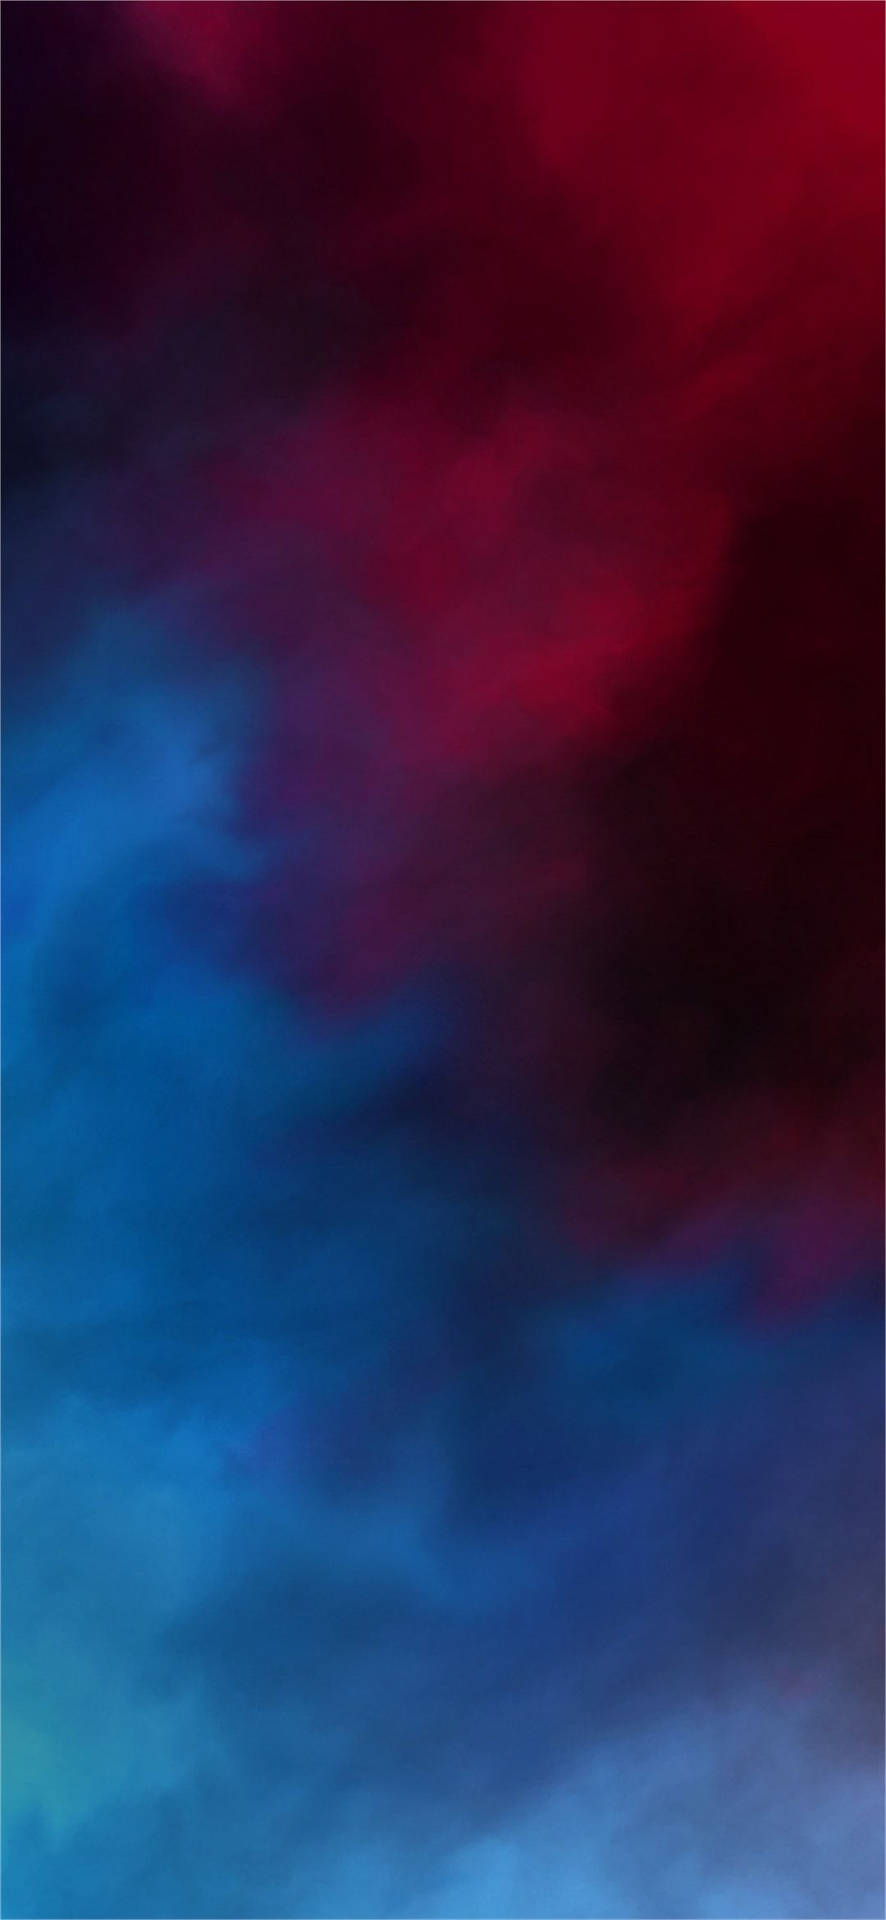 Realme Red And Blue Smoke Wallpaper